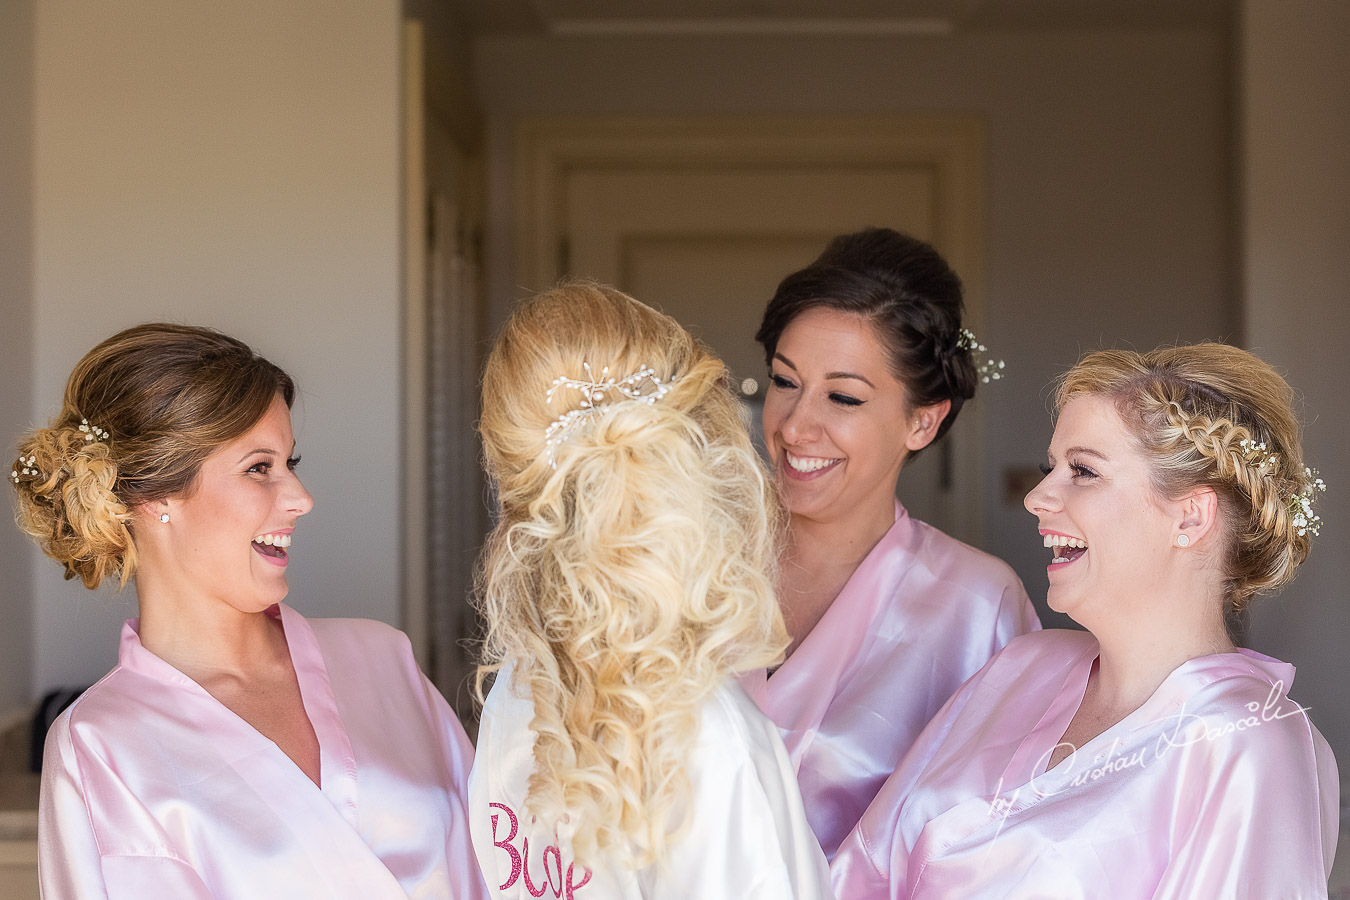 Team Bride is being photographed in the Bridal robe before getting ready at Aphrodite Hills Resort by wedding photographer Cristian Dascalu.